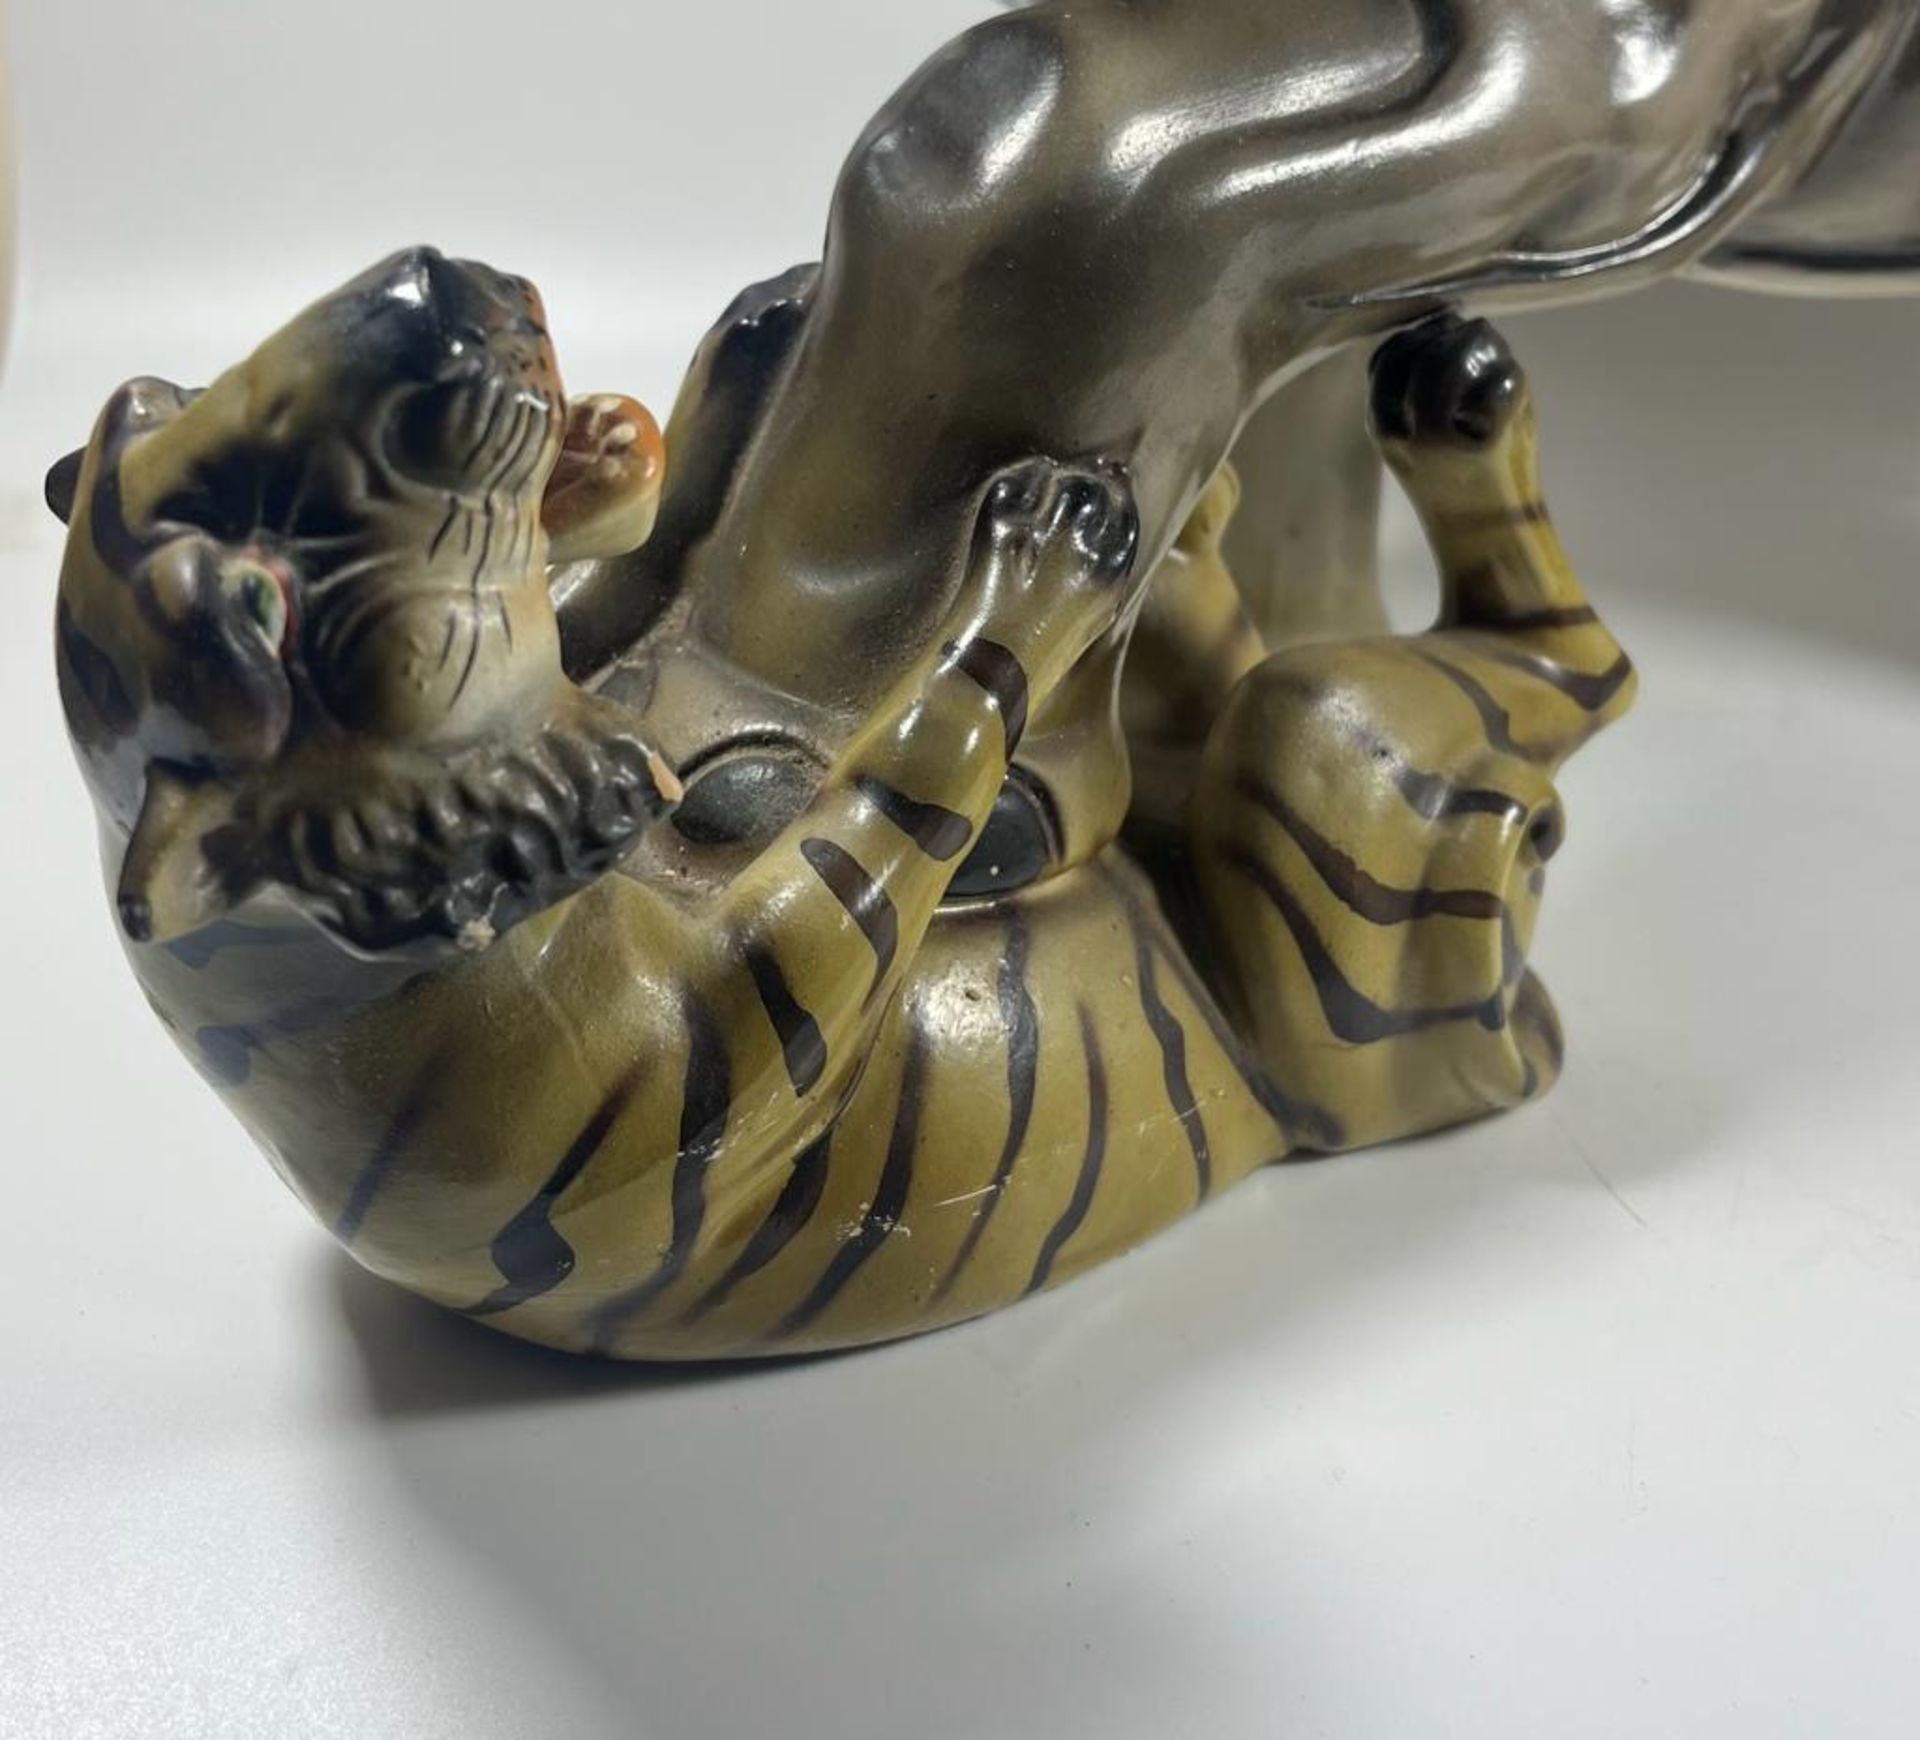 A LARGE 1970S ITALIAN POTTERY SCULPTURE OF AN ELEPHANT BEING ATTACKED BY TIGERS, LENGTH 49 CM - Image 3 of 6